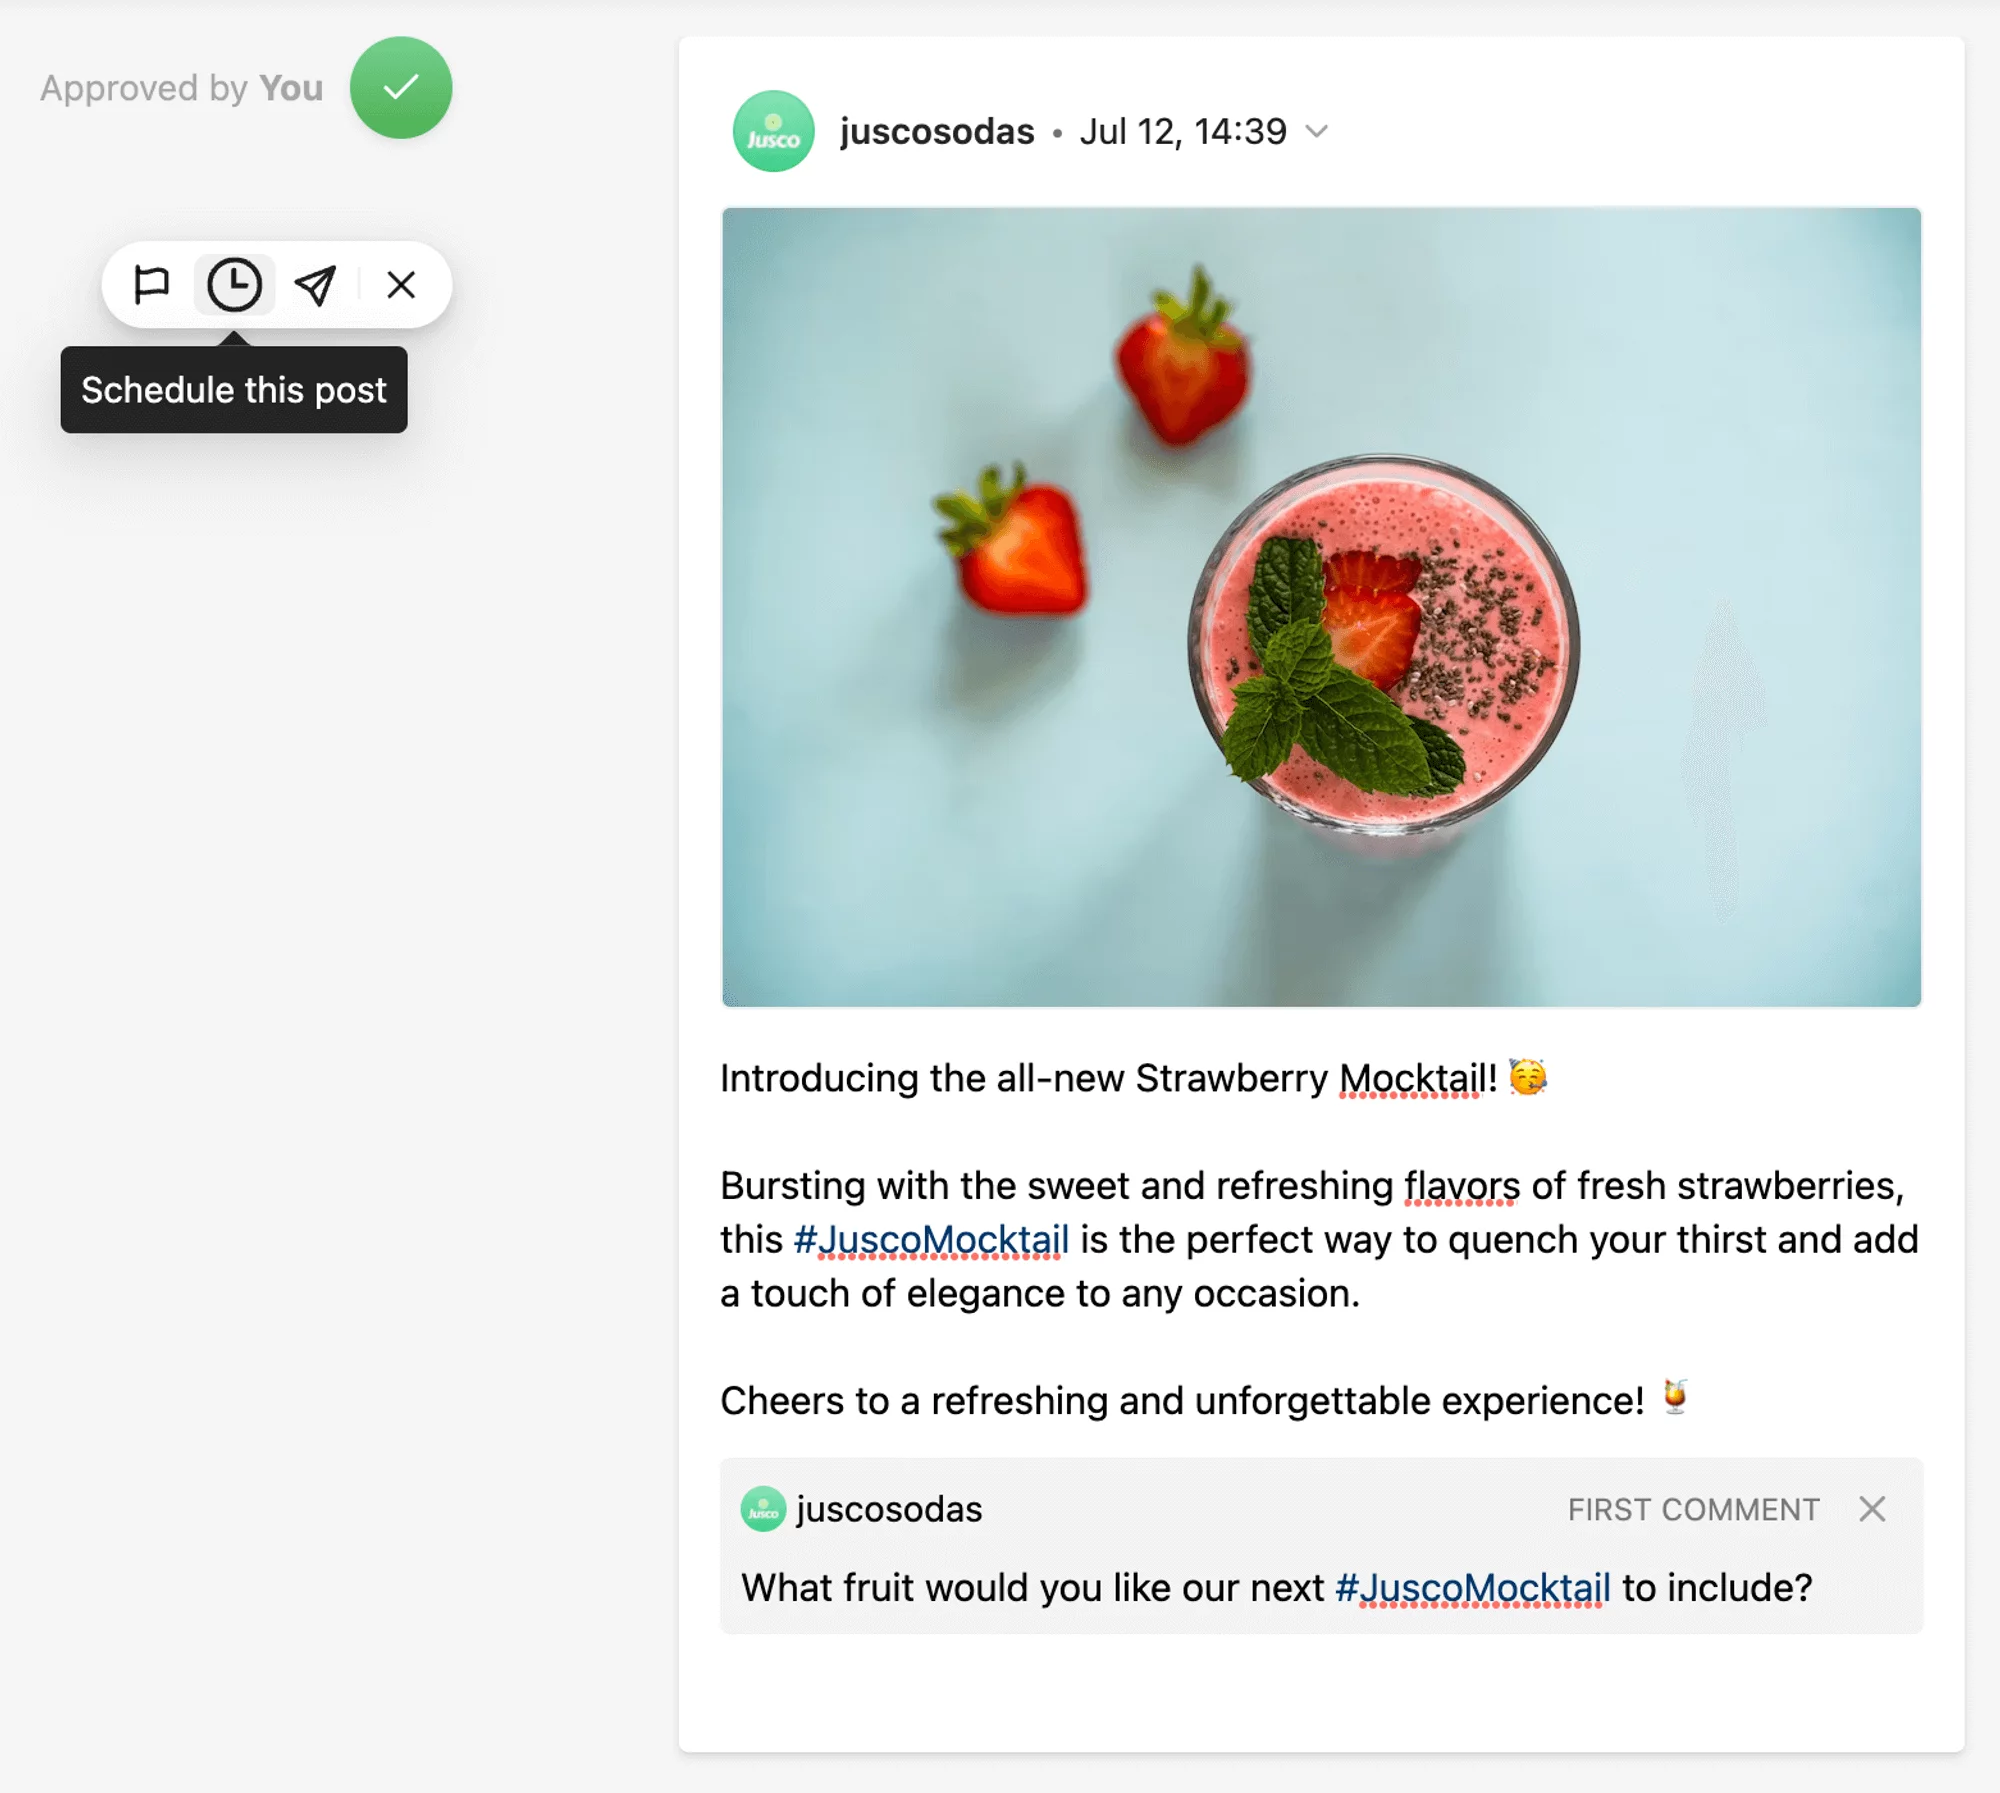 Scheduled social media post featuring an image of a strawberry mocktail, approved for posting with a caption describing its fresh and elegant flavors.